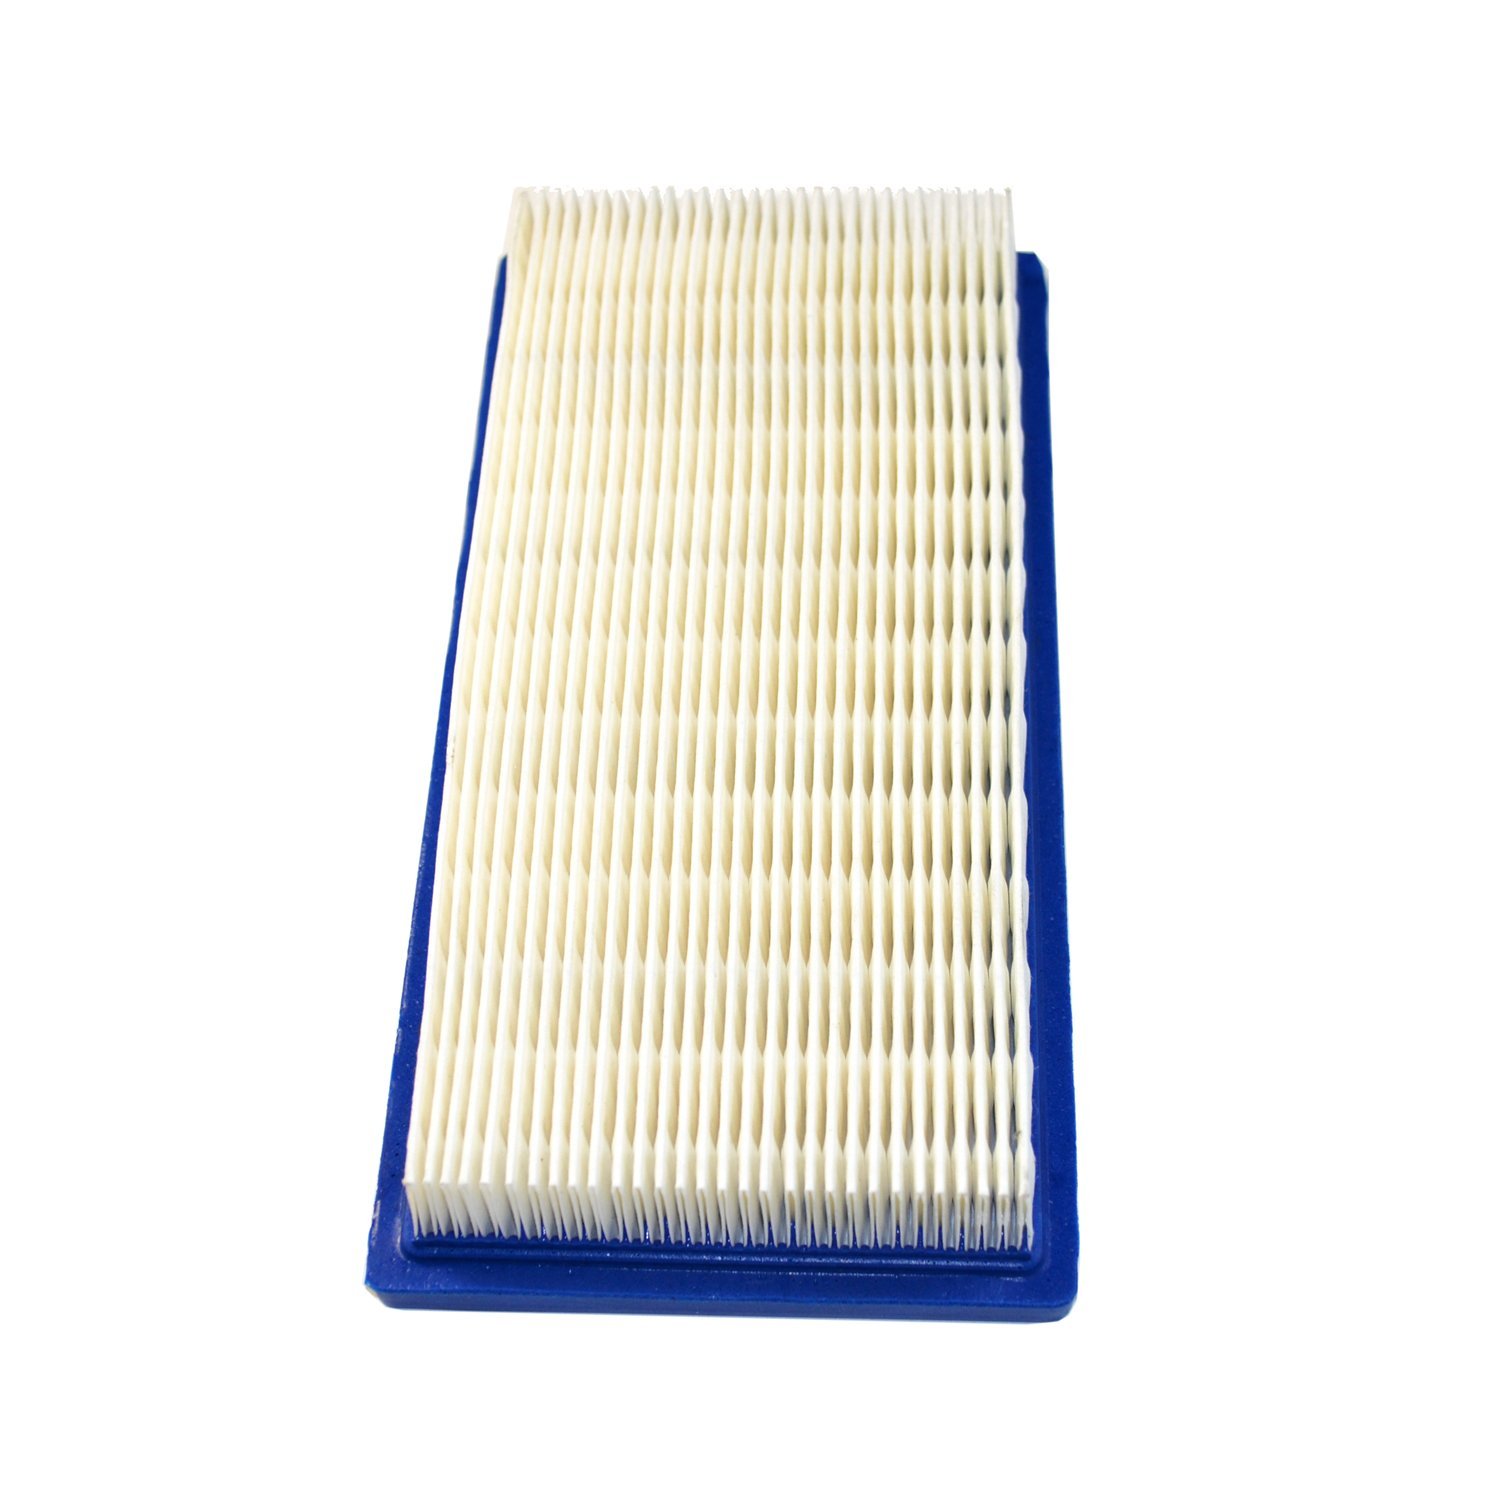 HQRP Air Filter for Generac 9 thru 13 HP (18 and 23-24 CID) Single Cylinder Vanguard engines 0710266 / 710266 Replacement 